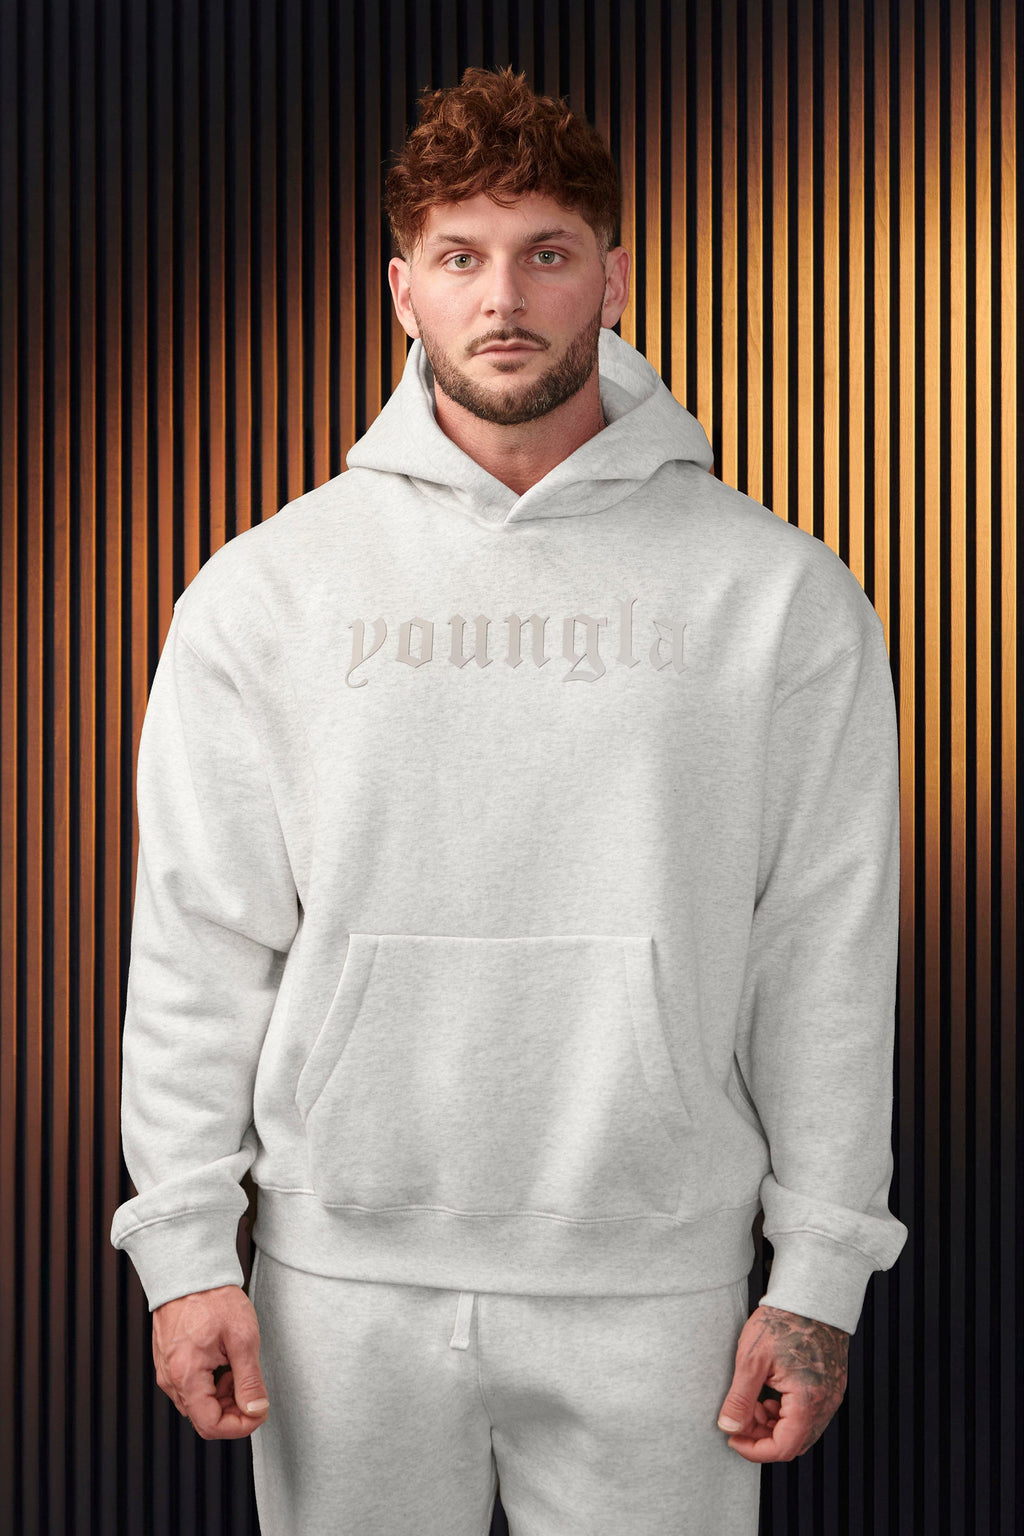 YoungLA - First look at our KingSnake Excellence Hoodie